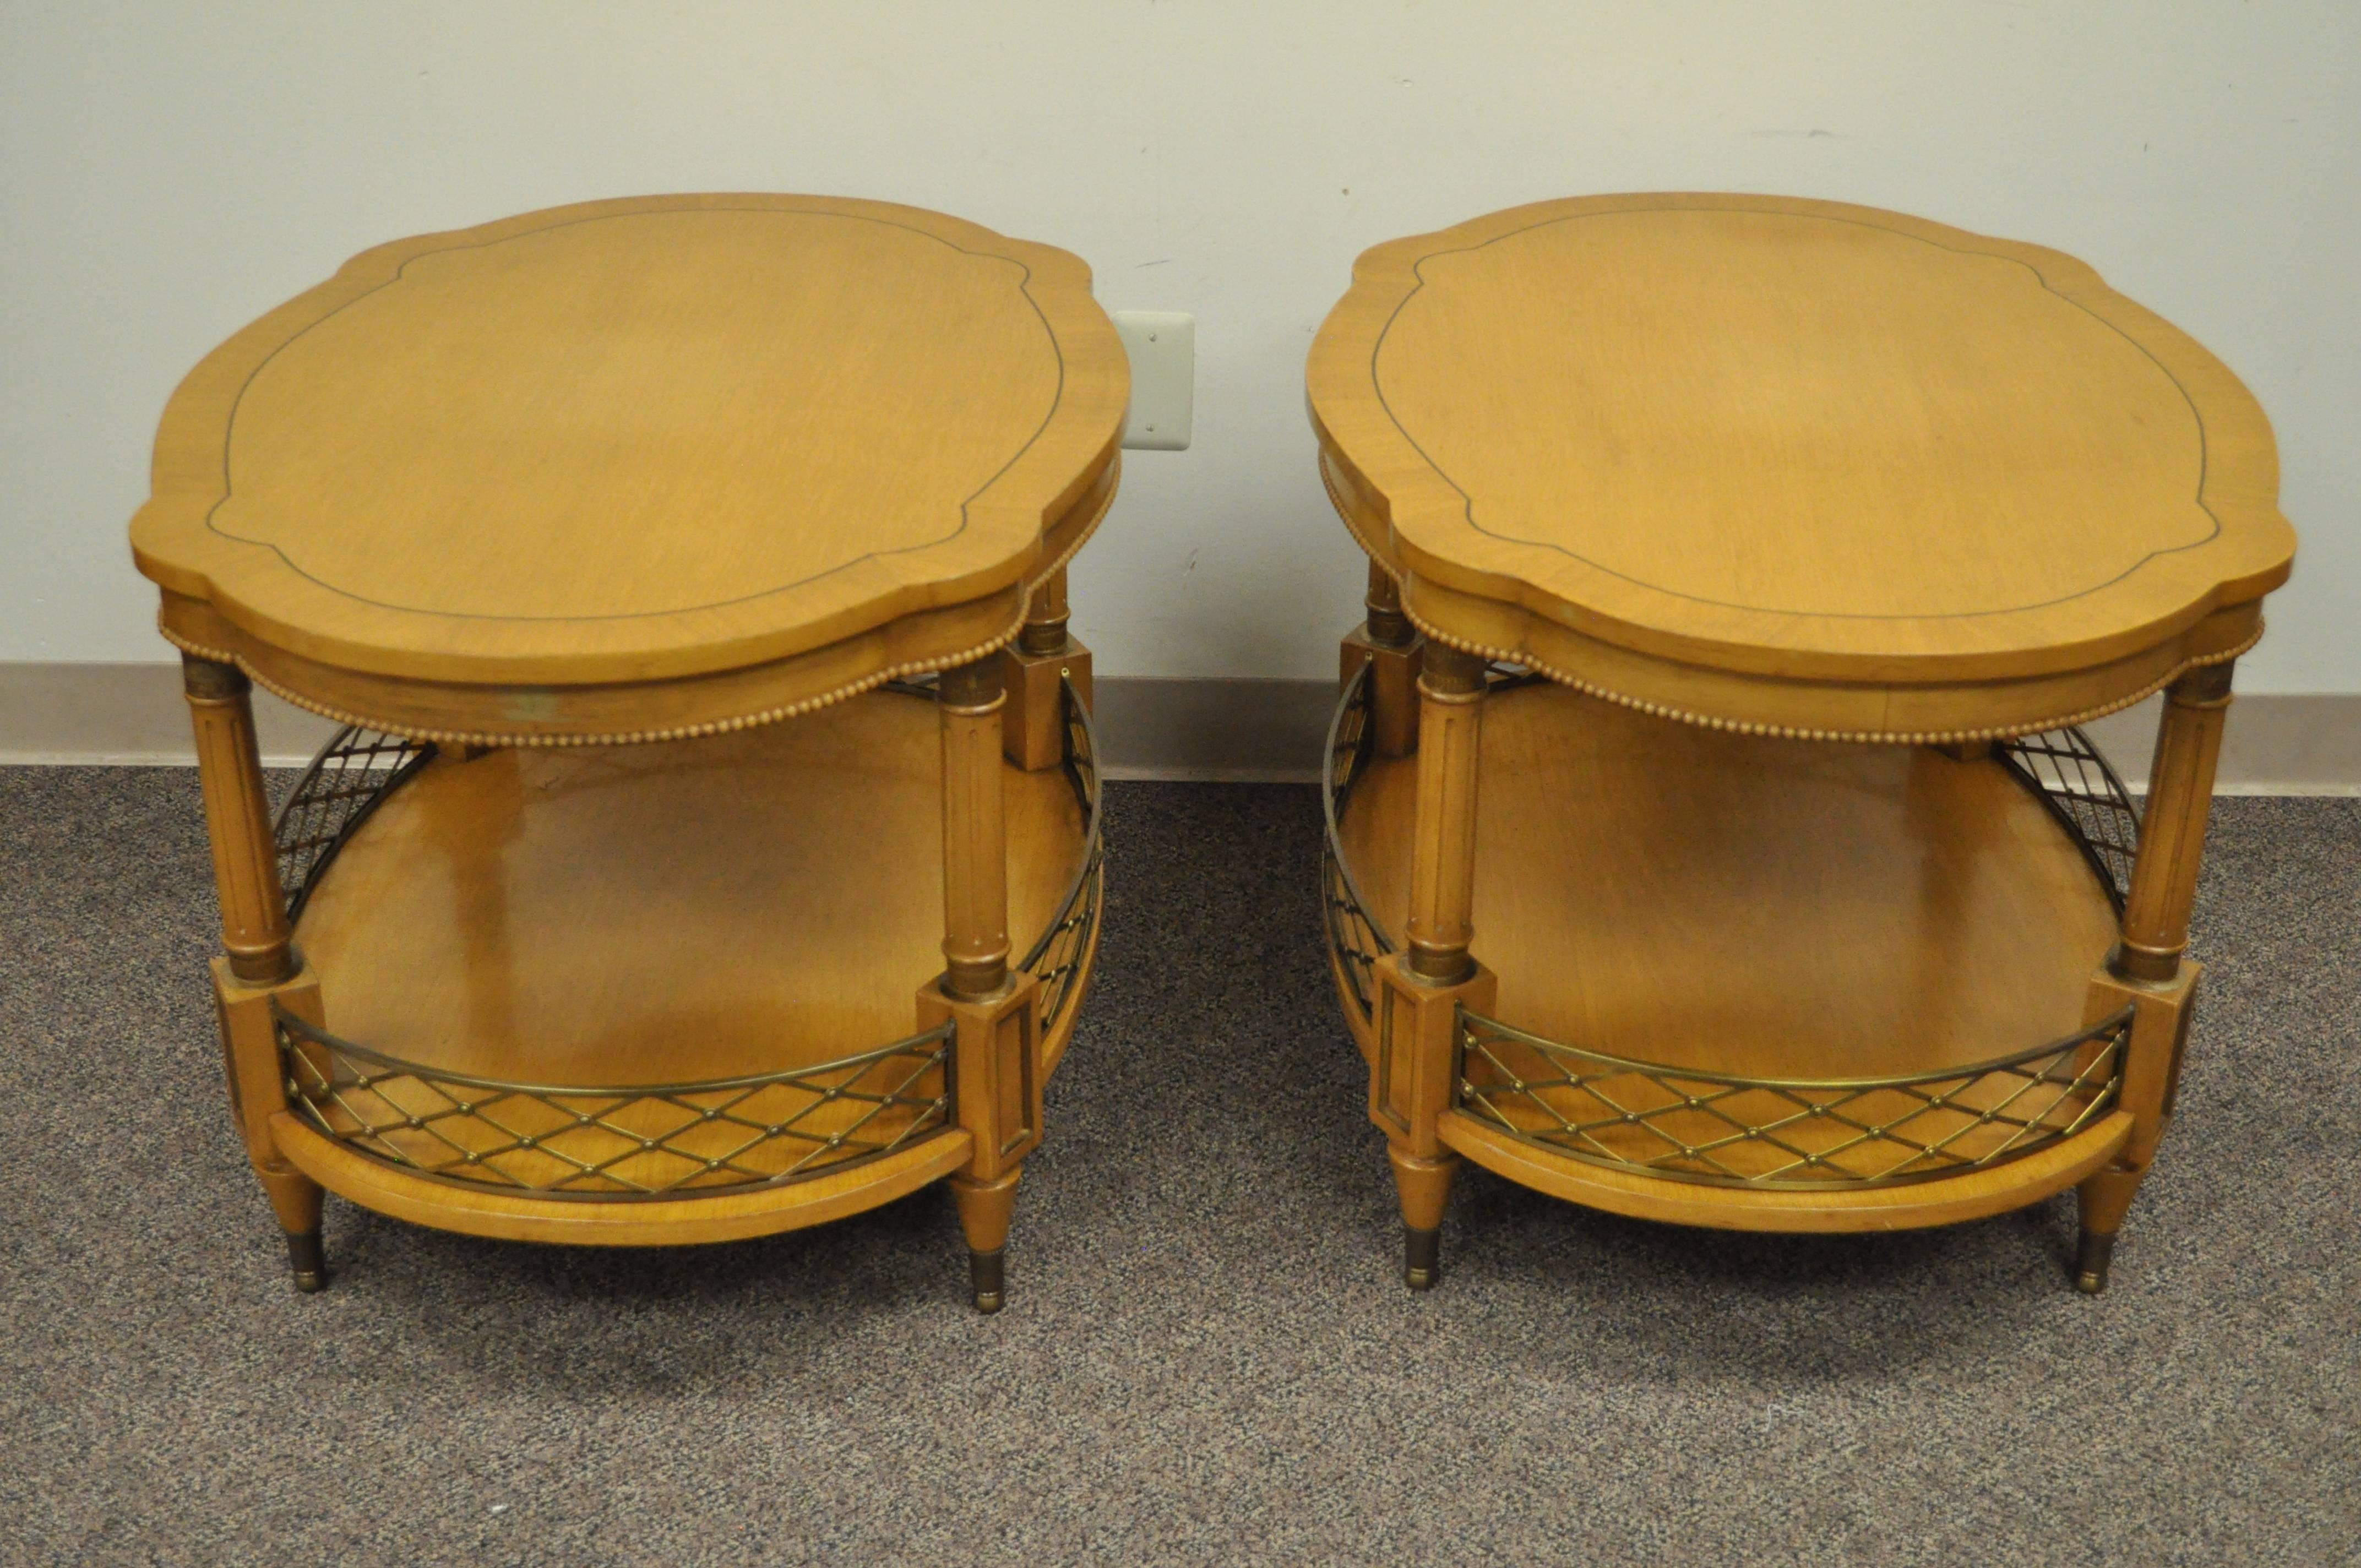 Quality pair of custom order vintage two-tier side tables with brass gallery, circa 1960s. Each table features a shaped banded top, beaded trim skirt, reeded column supports, crisscross brass lower gallery, brass capped feet and accents and elegant